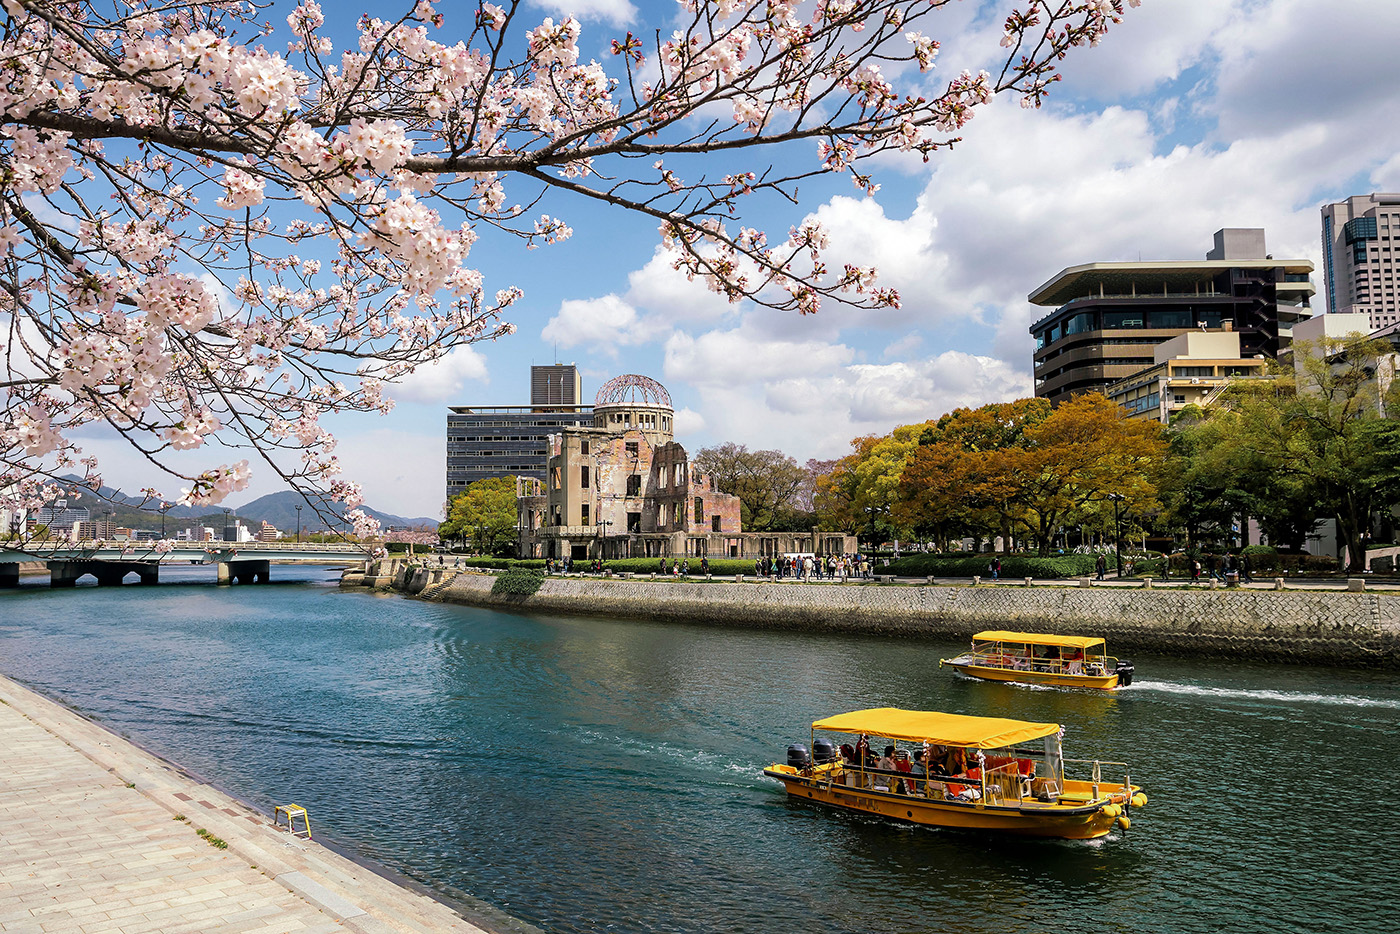 Kobe's cherry blossoms add a touch of softness to the Hiroshima Atomic Bomb Dome, creating a simple yet thought-provoking tableau